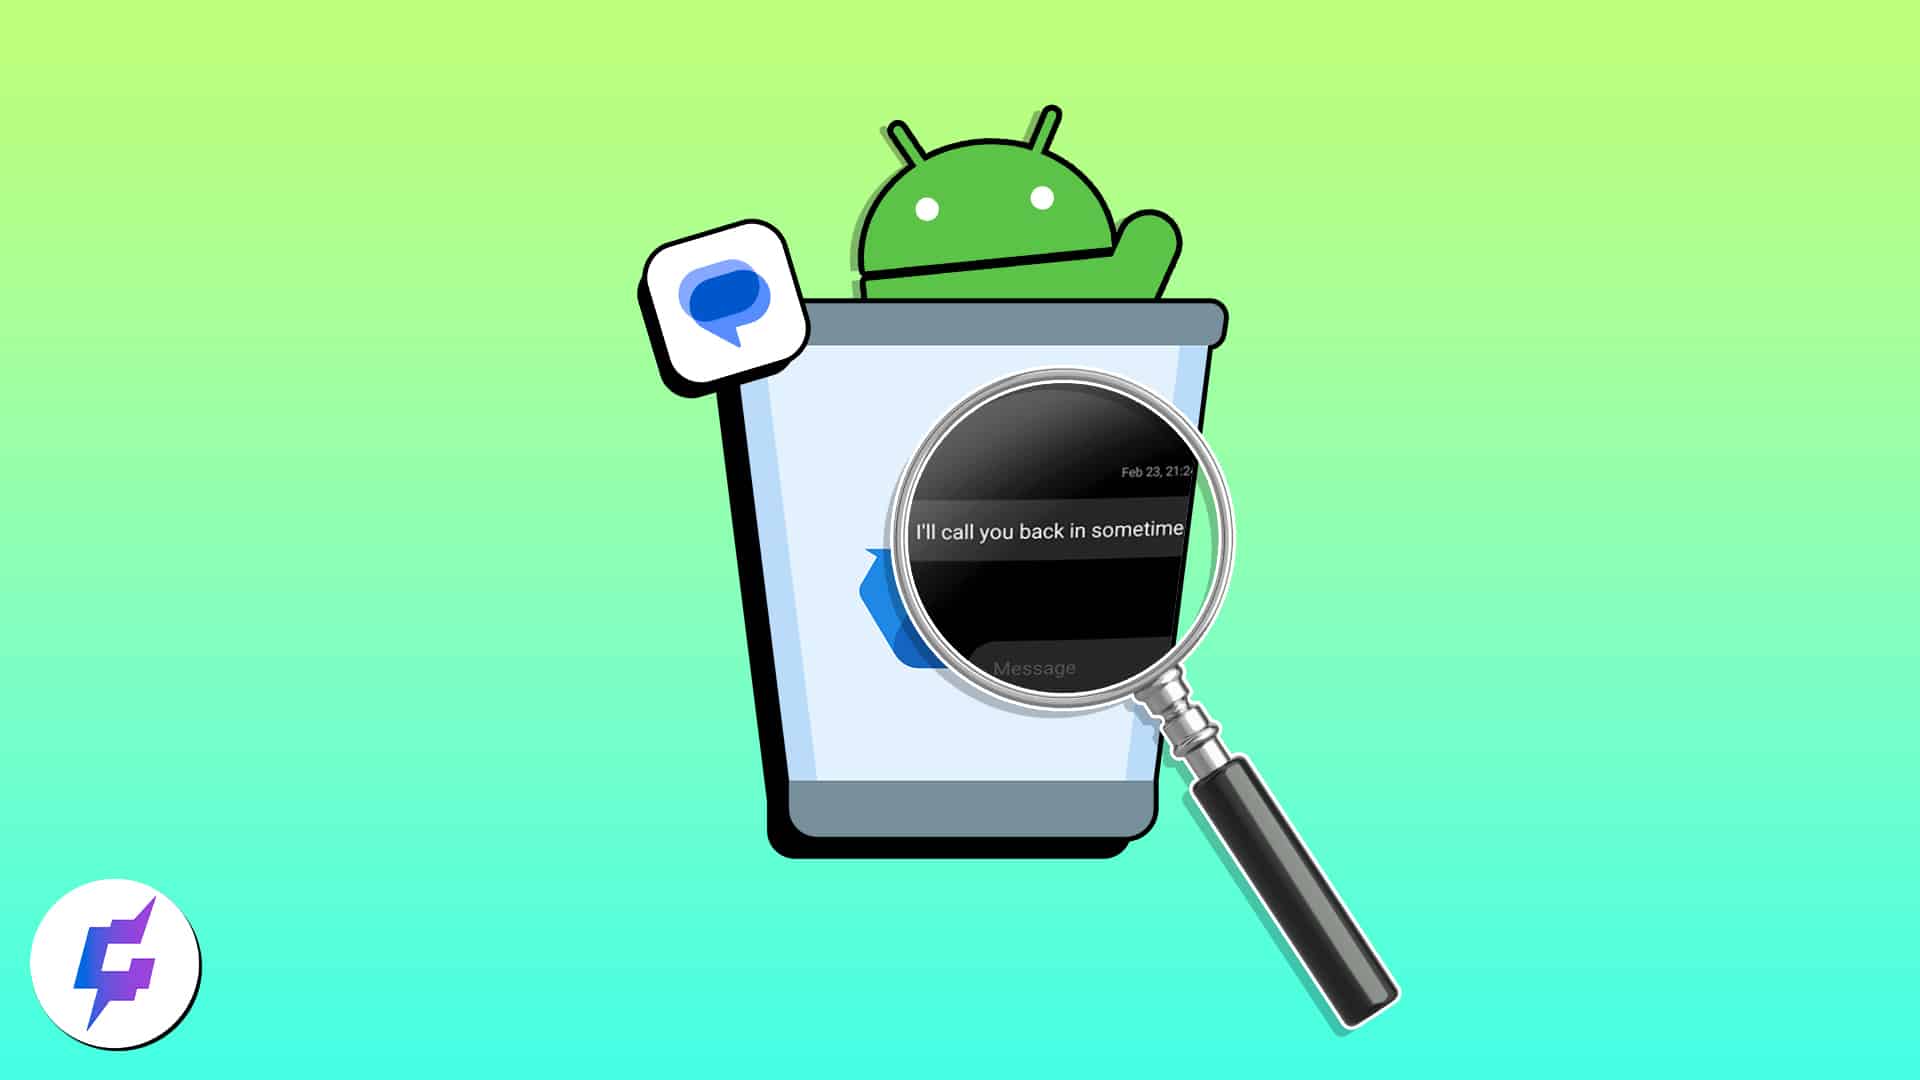 How to recover deleted text messages on Android phone